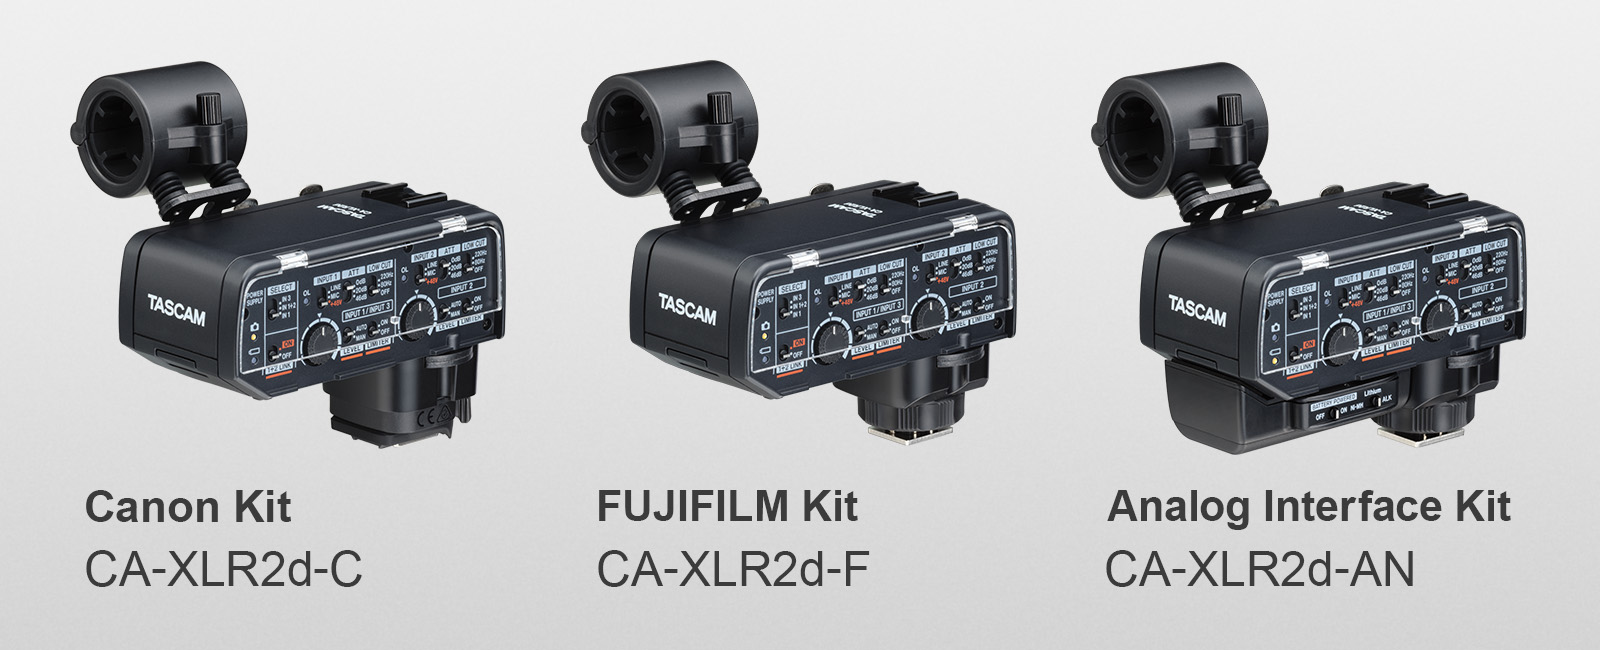 CA-XLR2d - New Upgraded Version 1.12 of Firmware Released